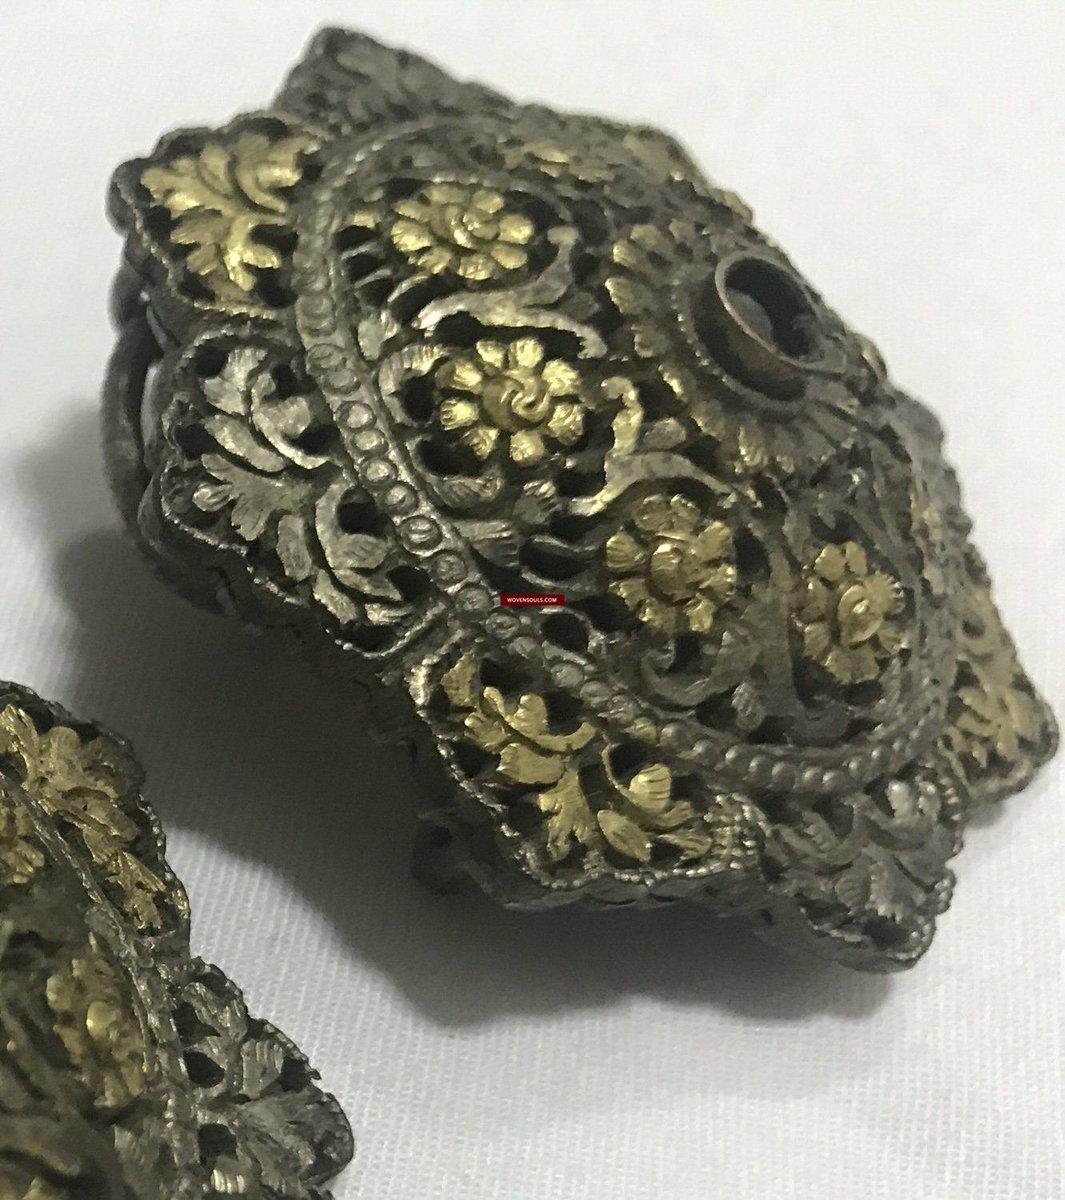 1263 Rare Antique Himalayan Silver Ornament Pair - Koma / Kooma from Sikkim-WOVENSOULS-Antique-Vintage-Textiles-Art-Decor